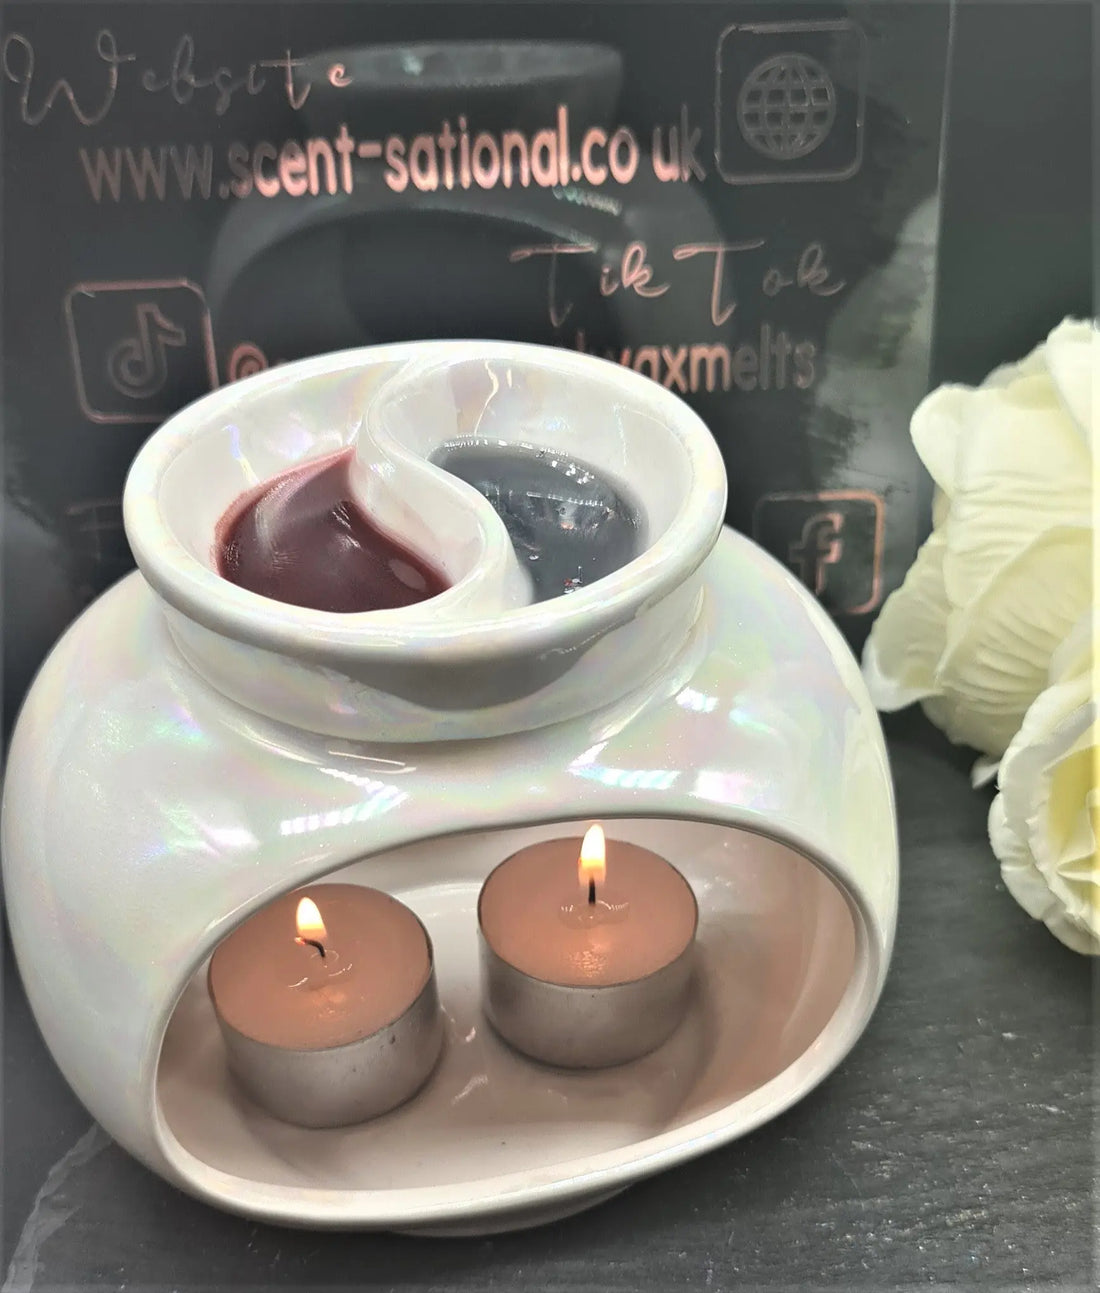 Can you mix two different wax melts? Scent Sational Wax melts